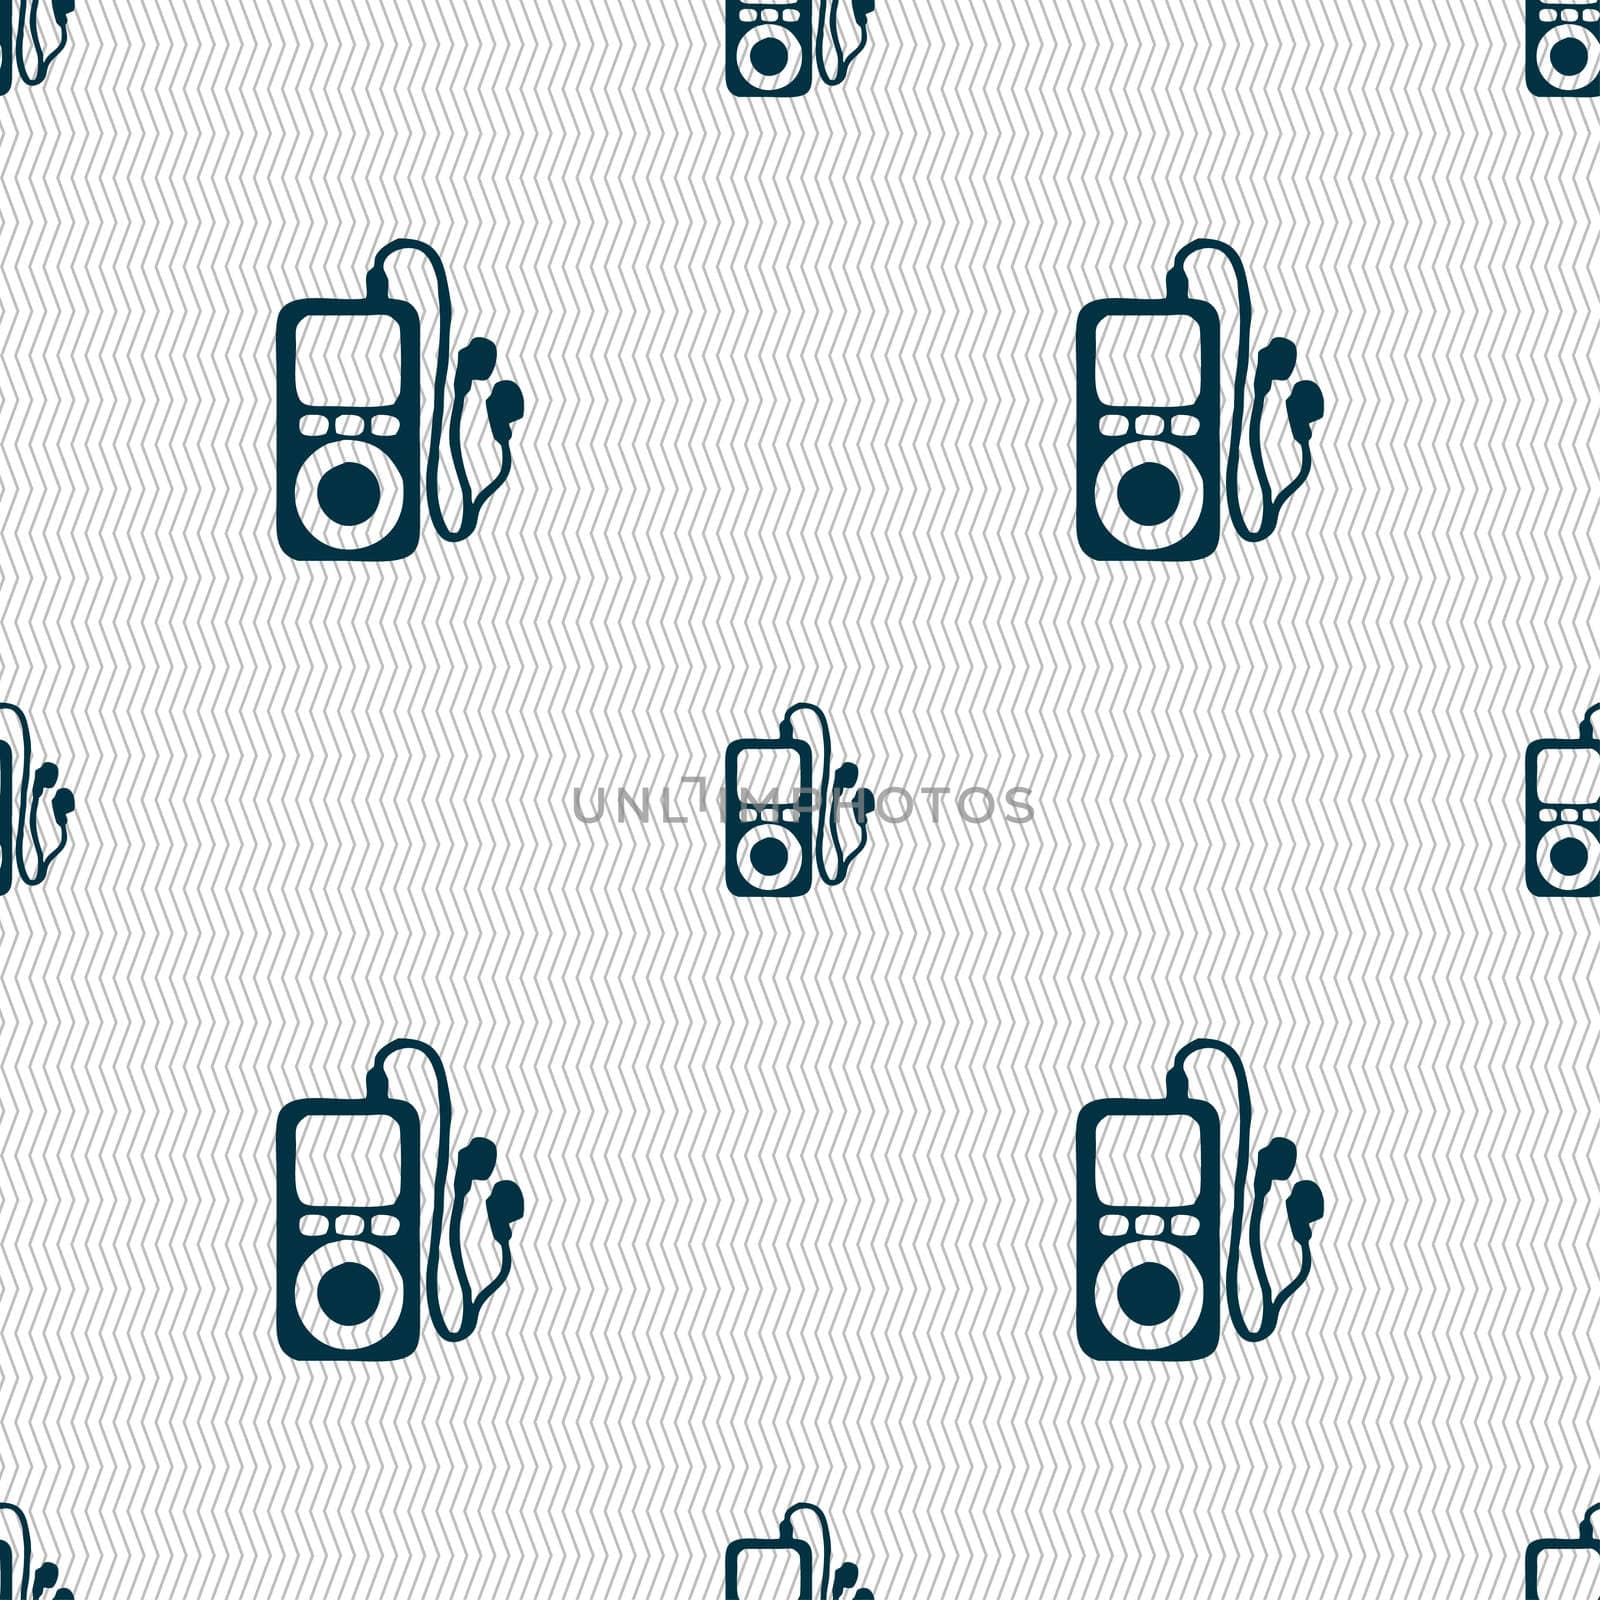 MP3 player, headphones, music icon sign. Seamless pattern with geometric texture. illustration